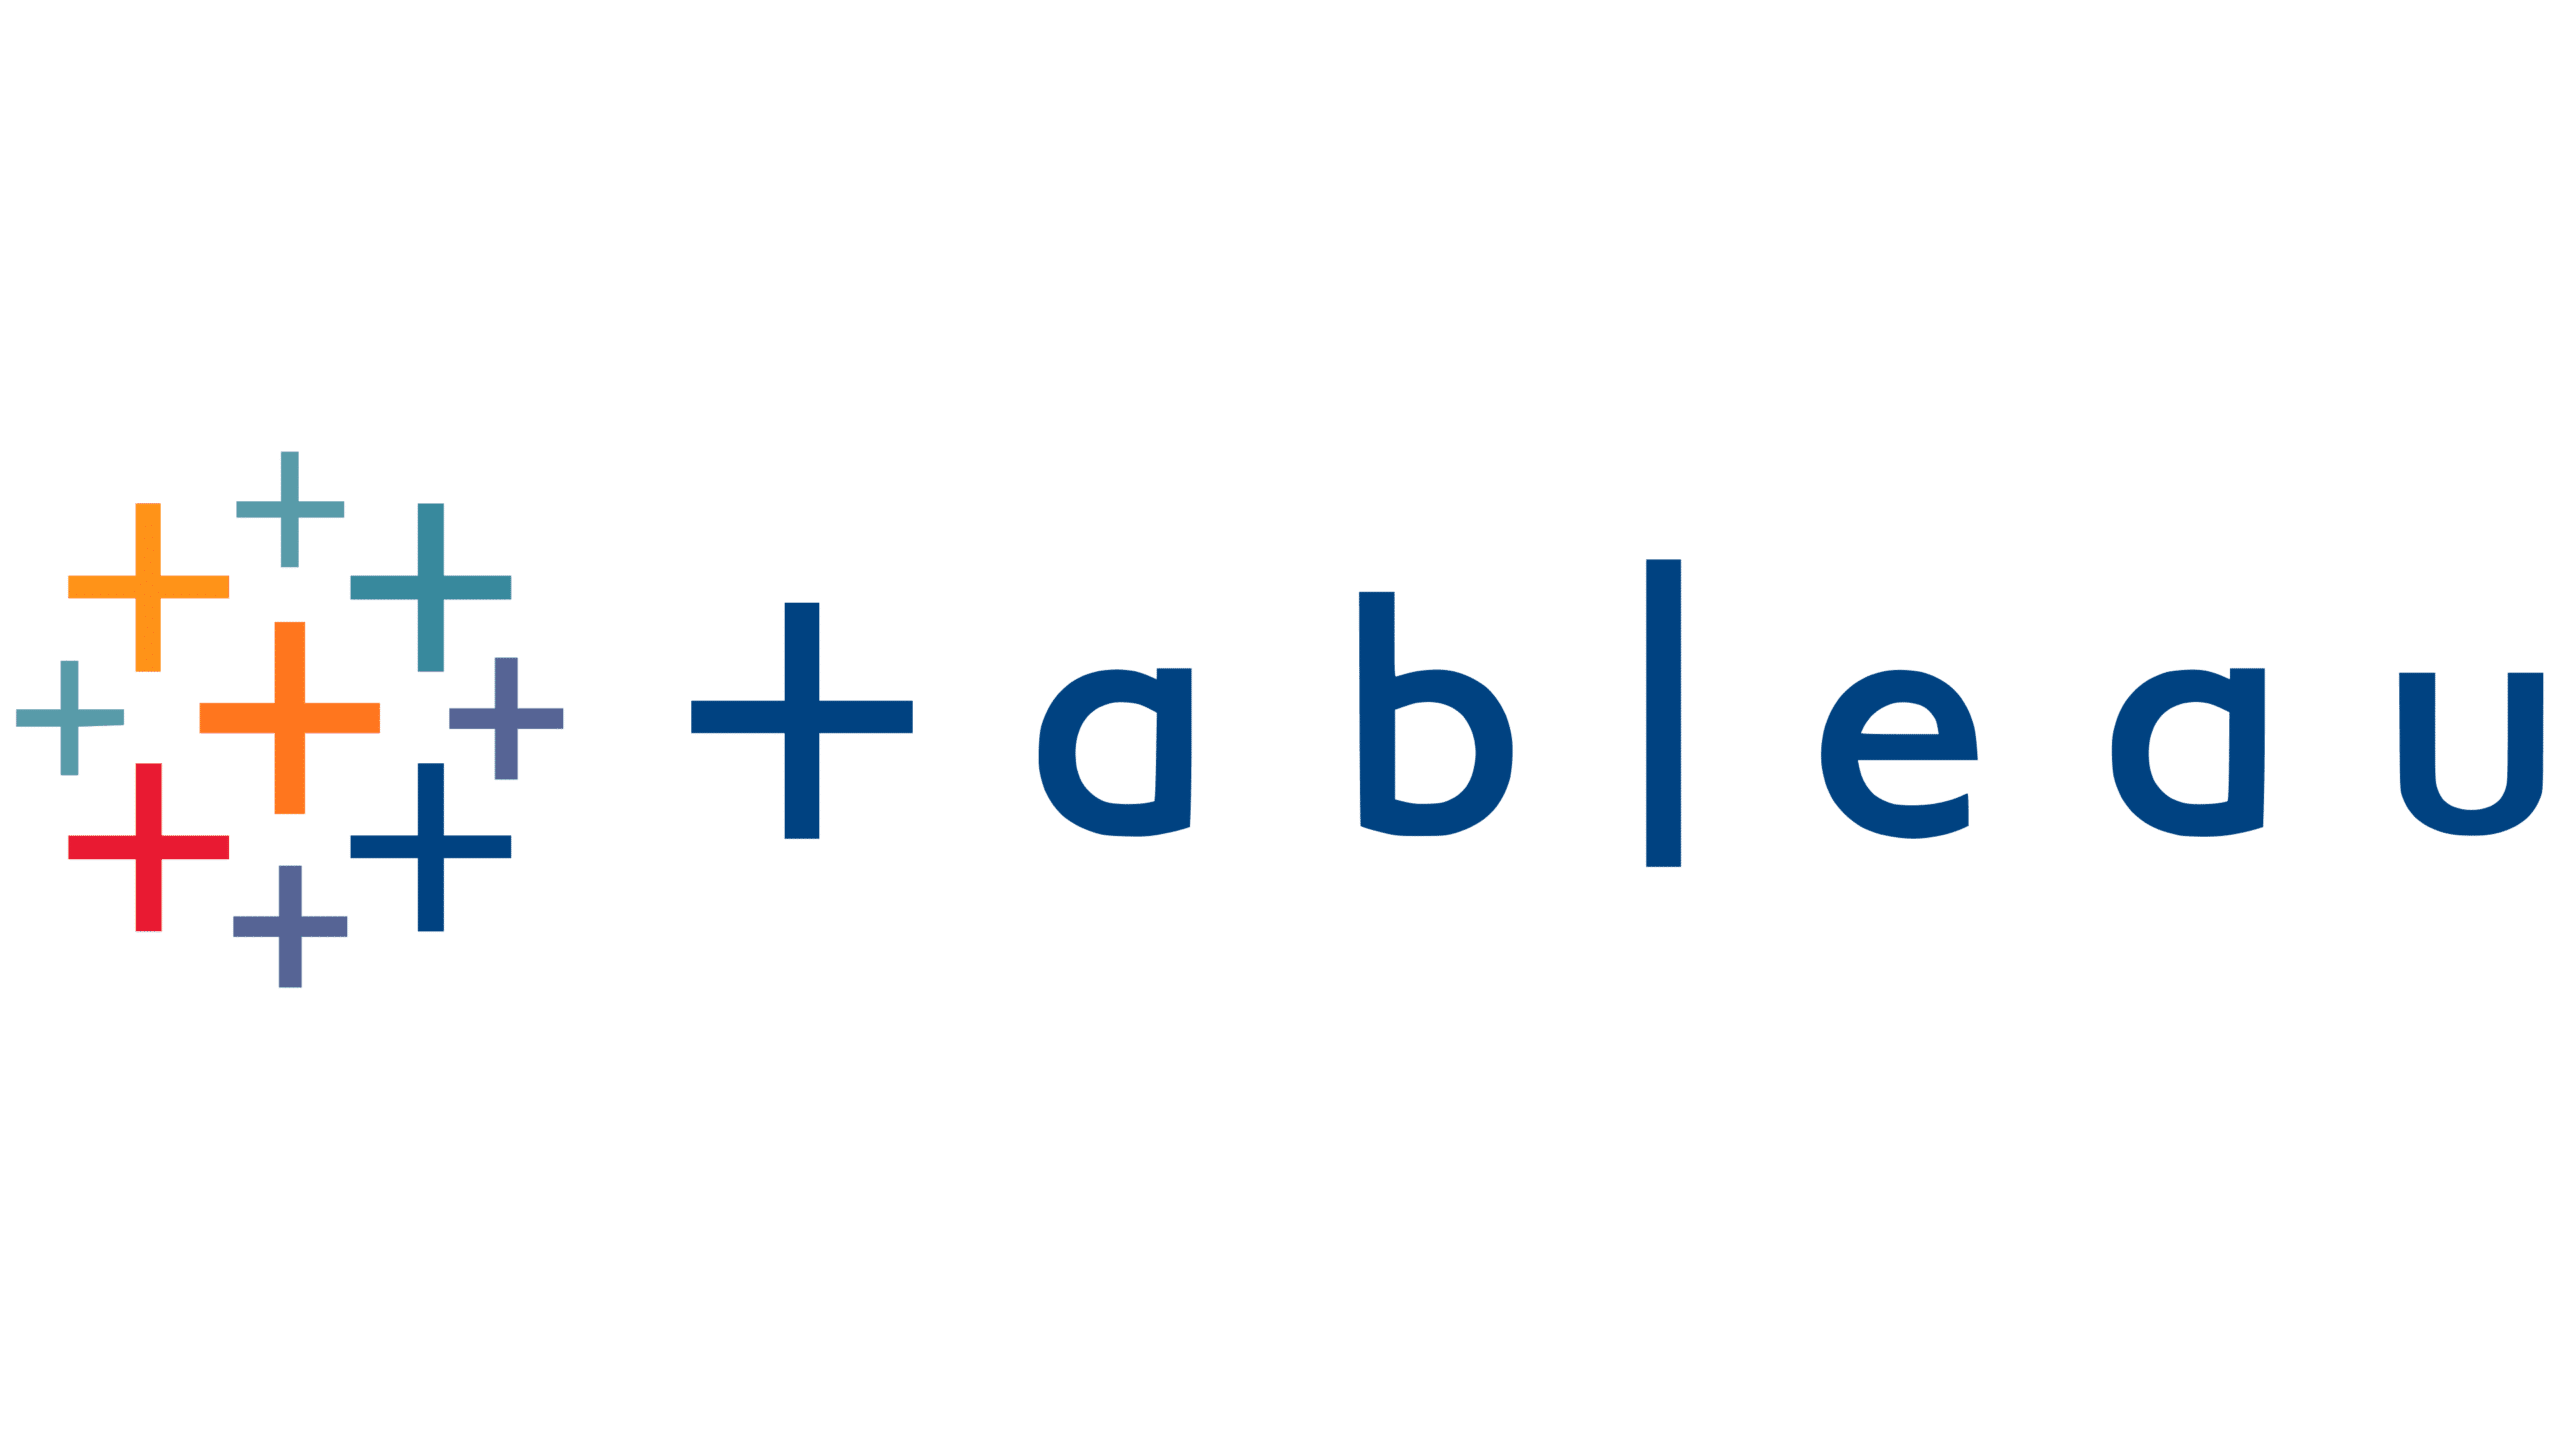 Univate works with Tableau